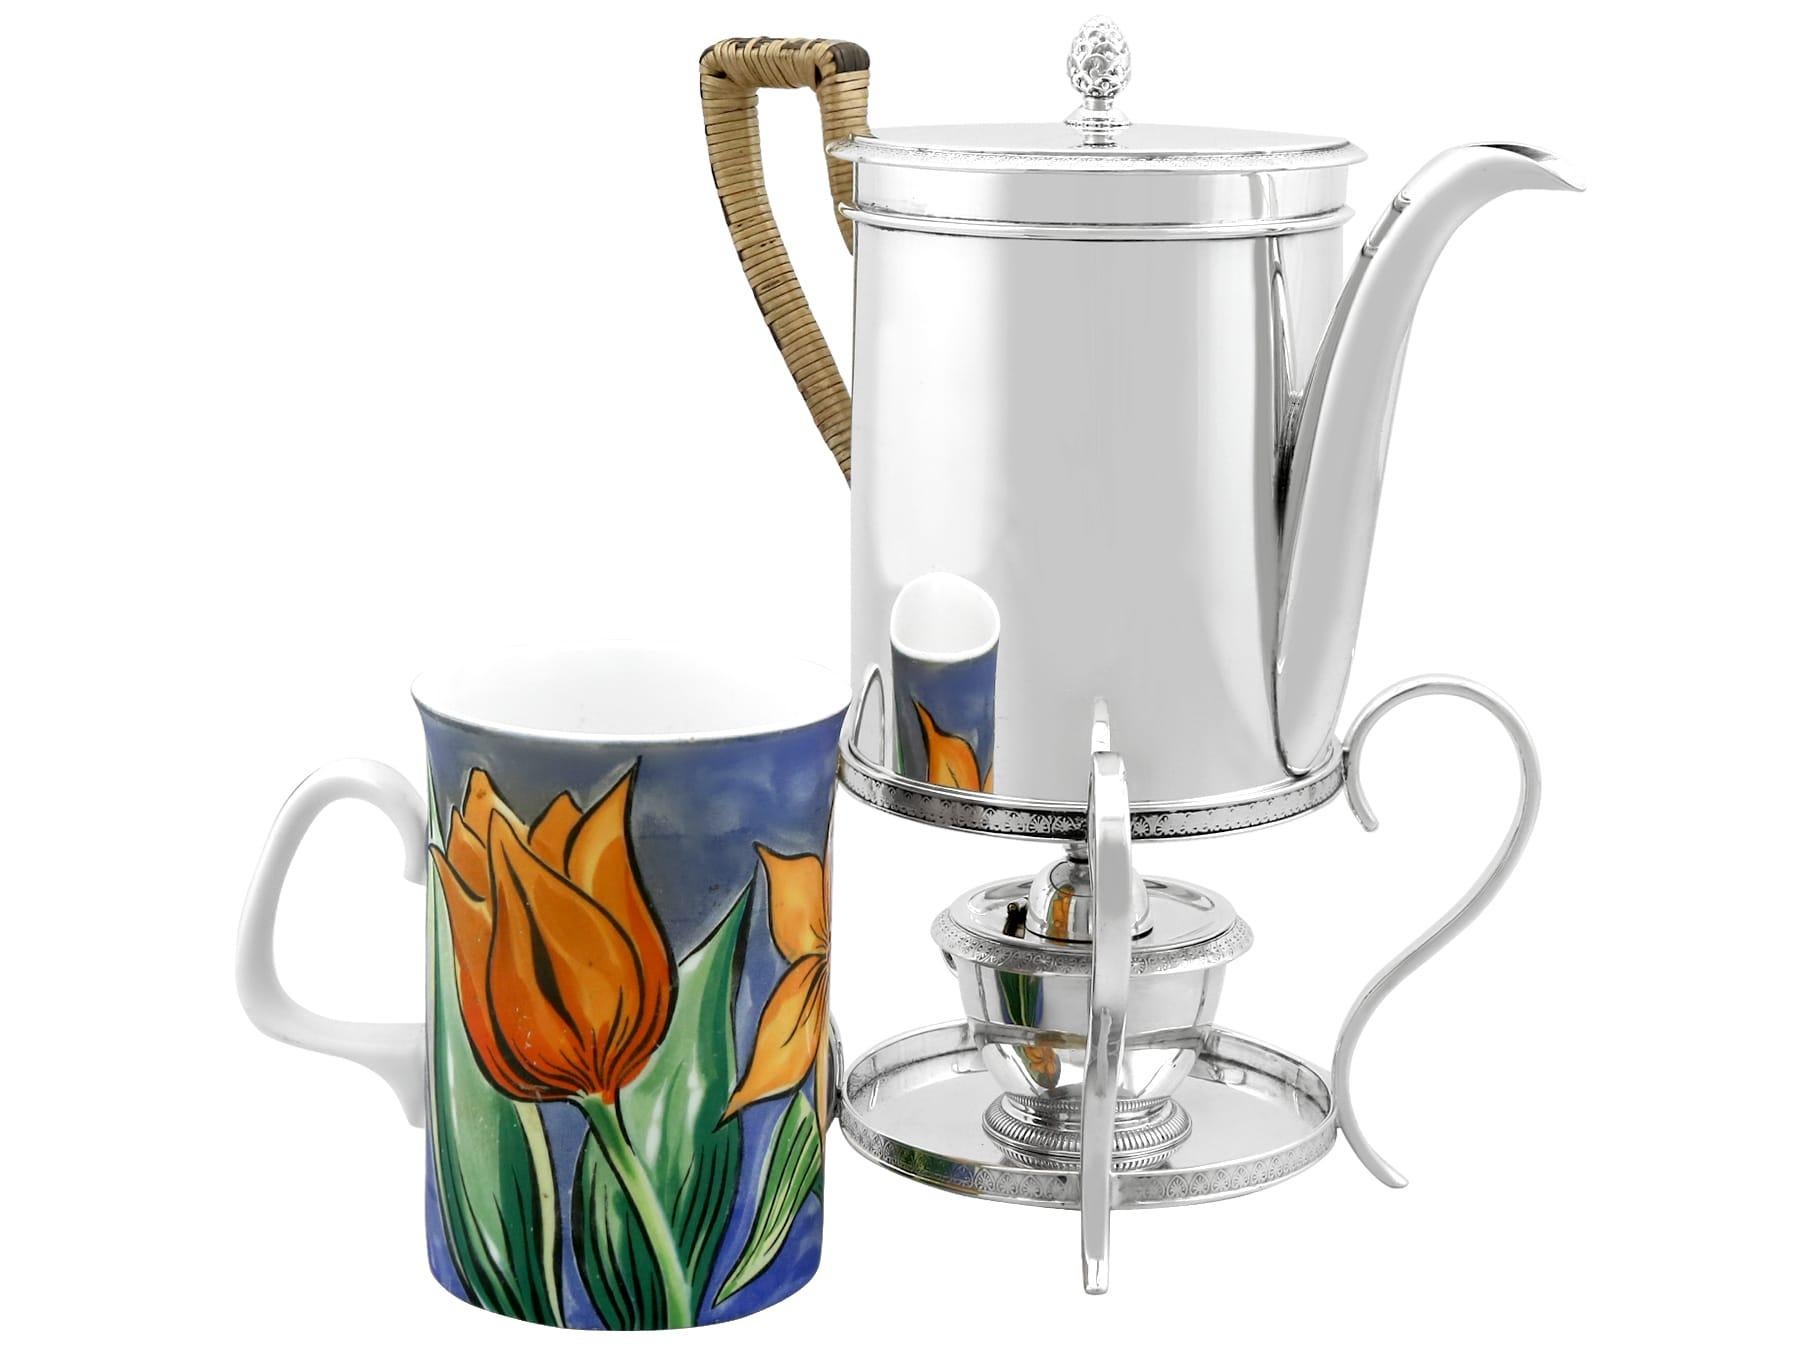 An exceptional, fine and impressive antique Austrian silver coffee pot with spirit burner; an addition to our Georgian silver teaware collection

This exceptional antique Austrian silver coffee pot has a plain cylindrical form.

The coffee pot body